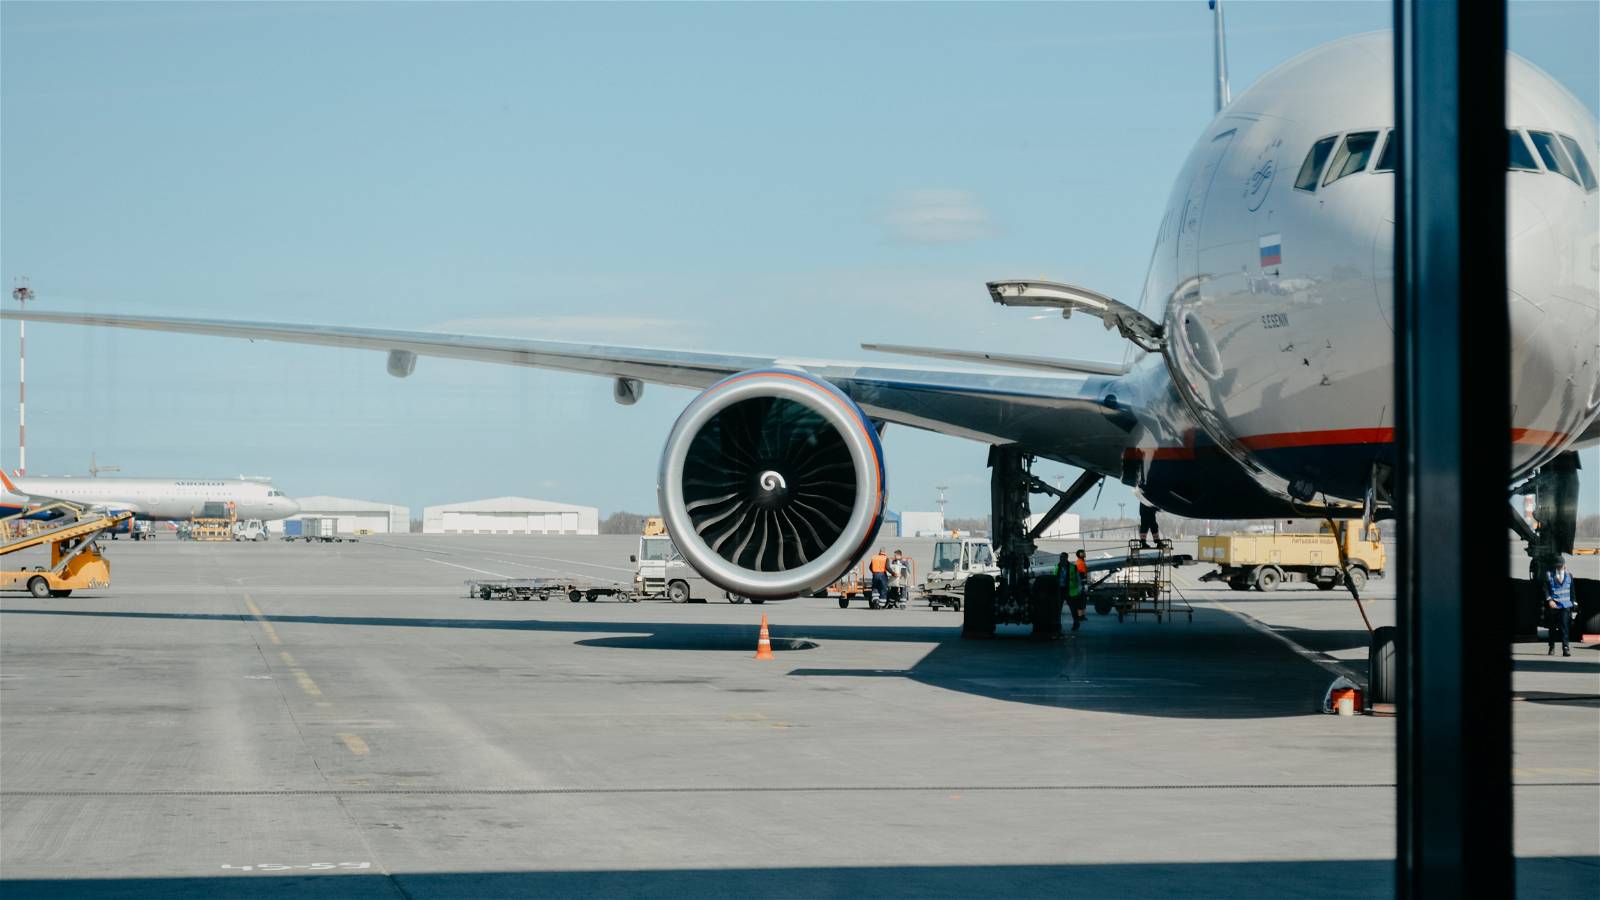 Aviation is a major climate problem, but electrification and biofuels are solutions